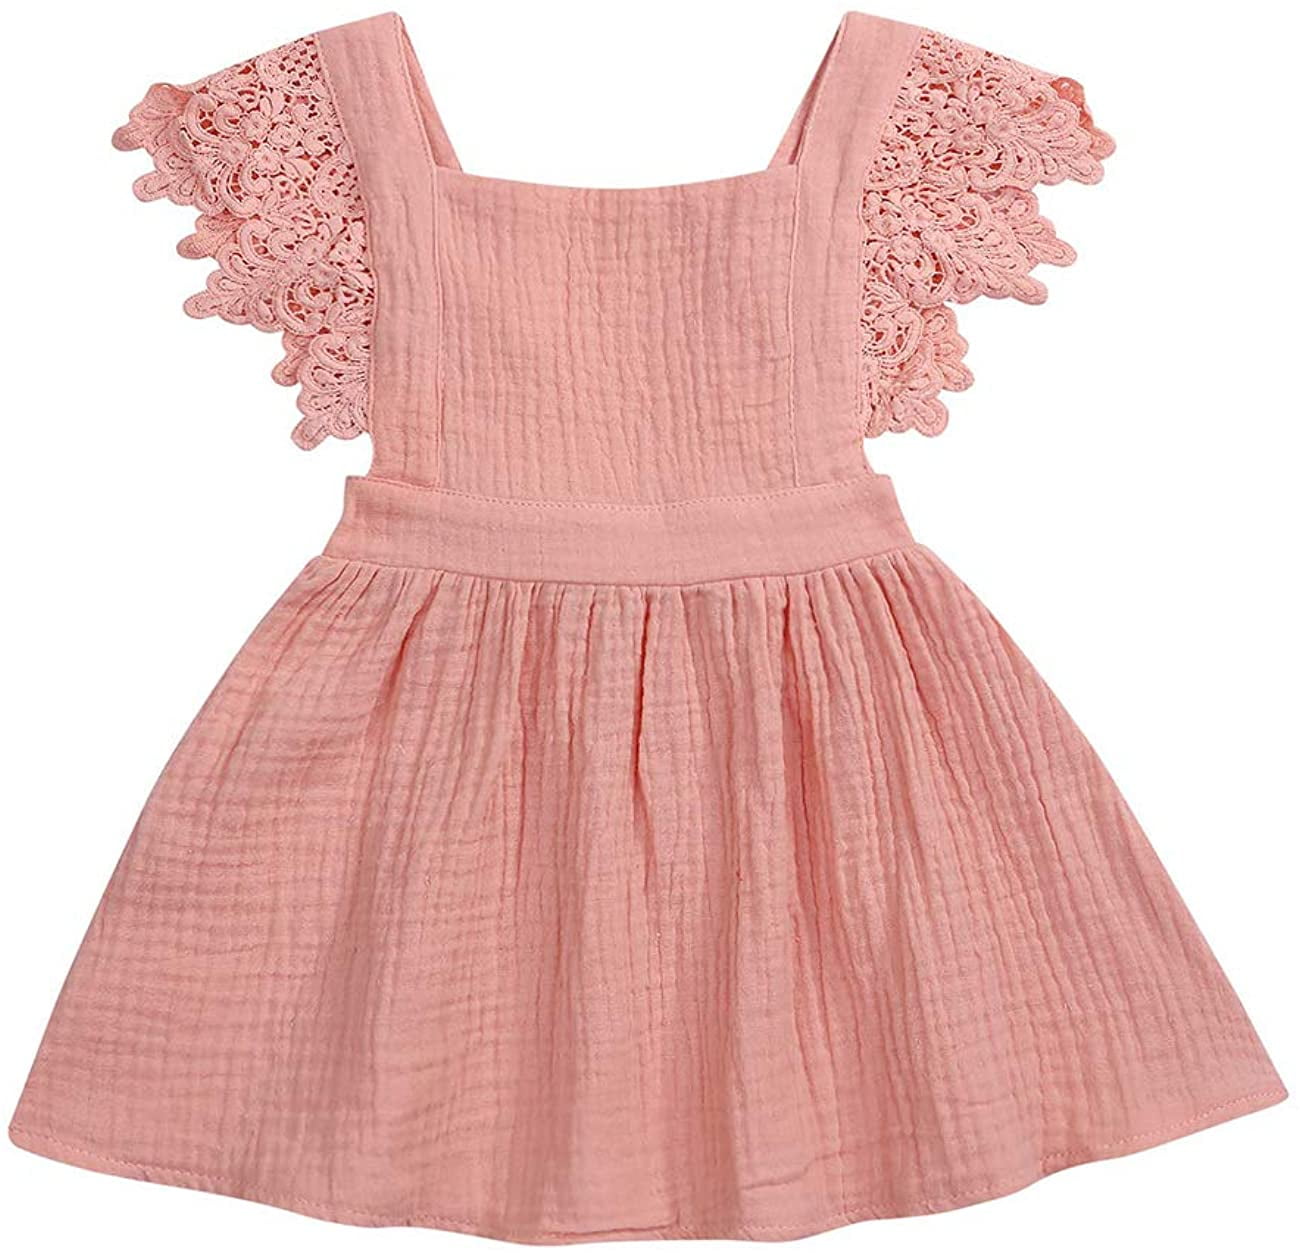 Xuuly Toddler Baby Girls Clothes Ruffle Sleeveless Summer Breathable Princess One-Piece Skirt Dress Set 